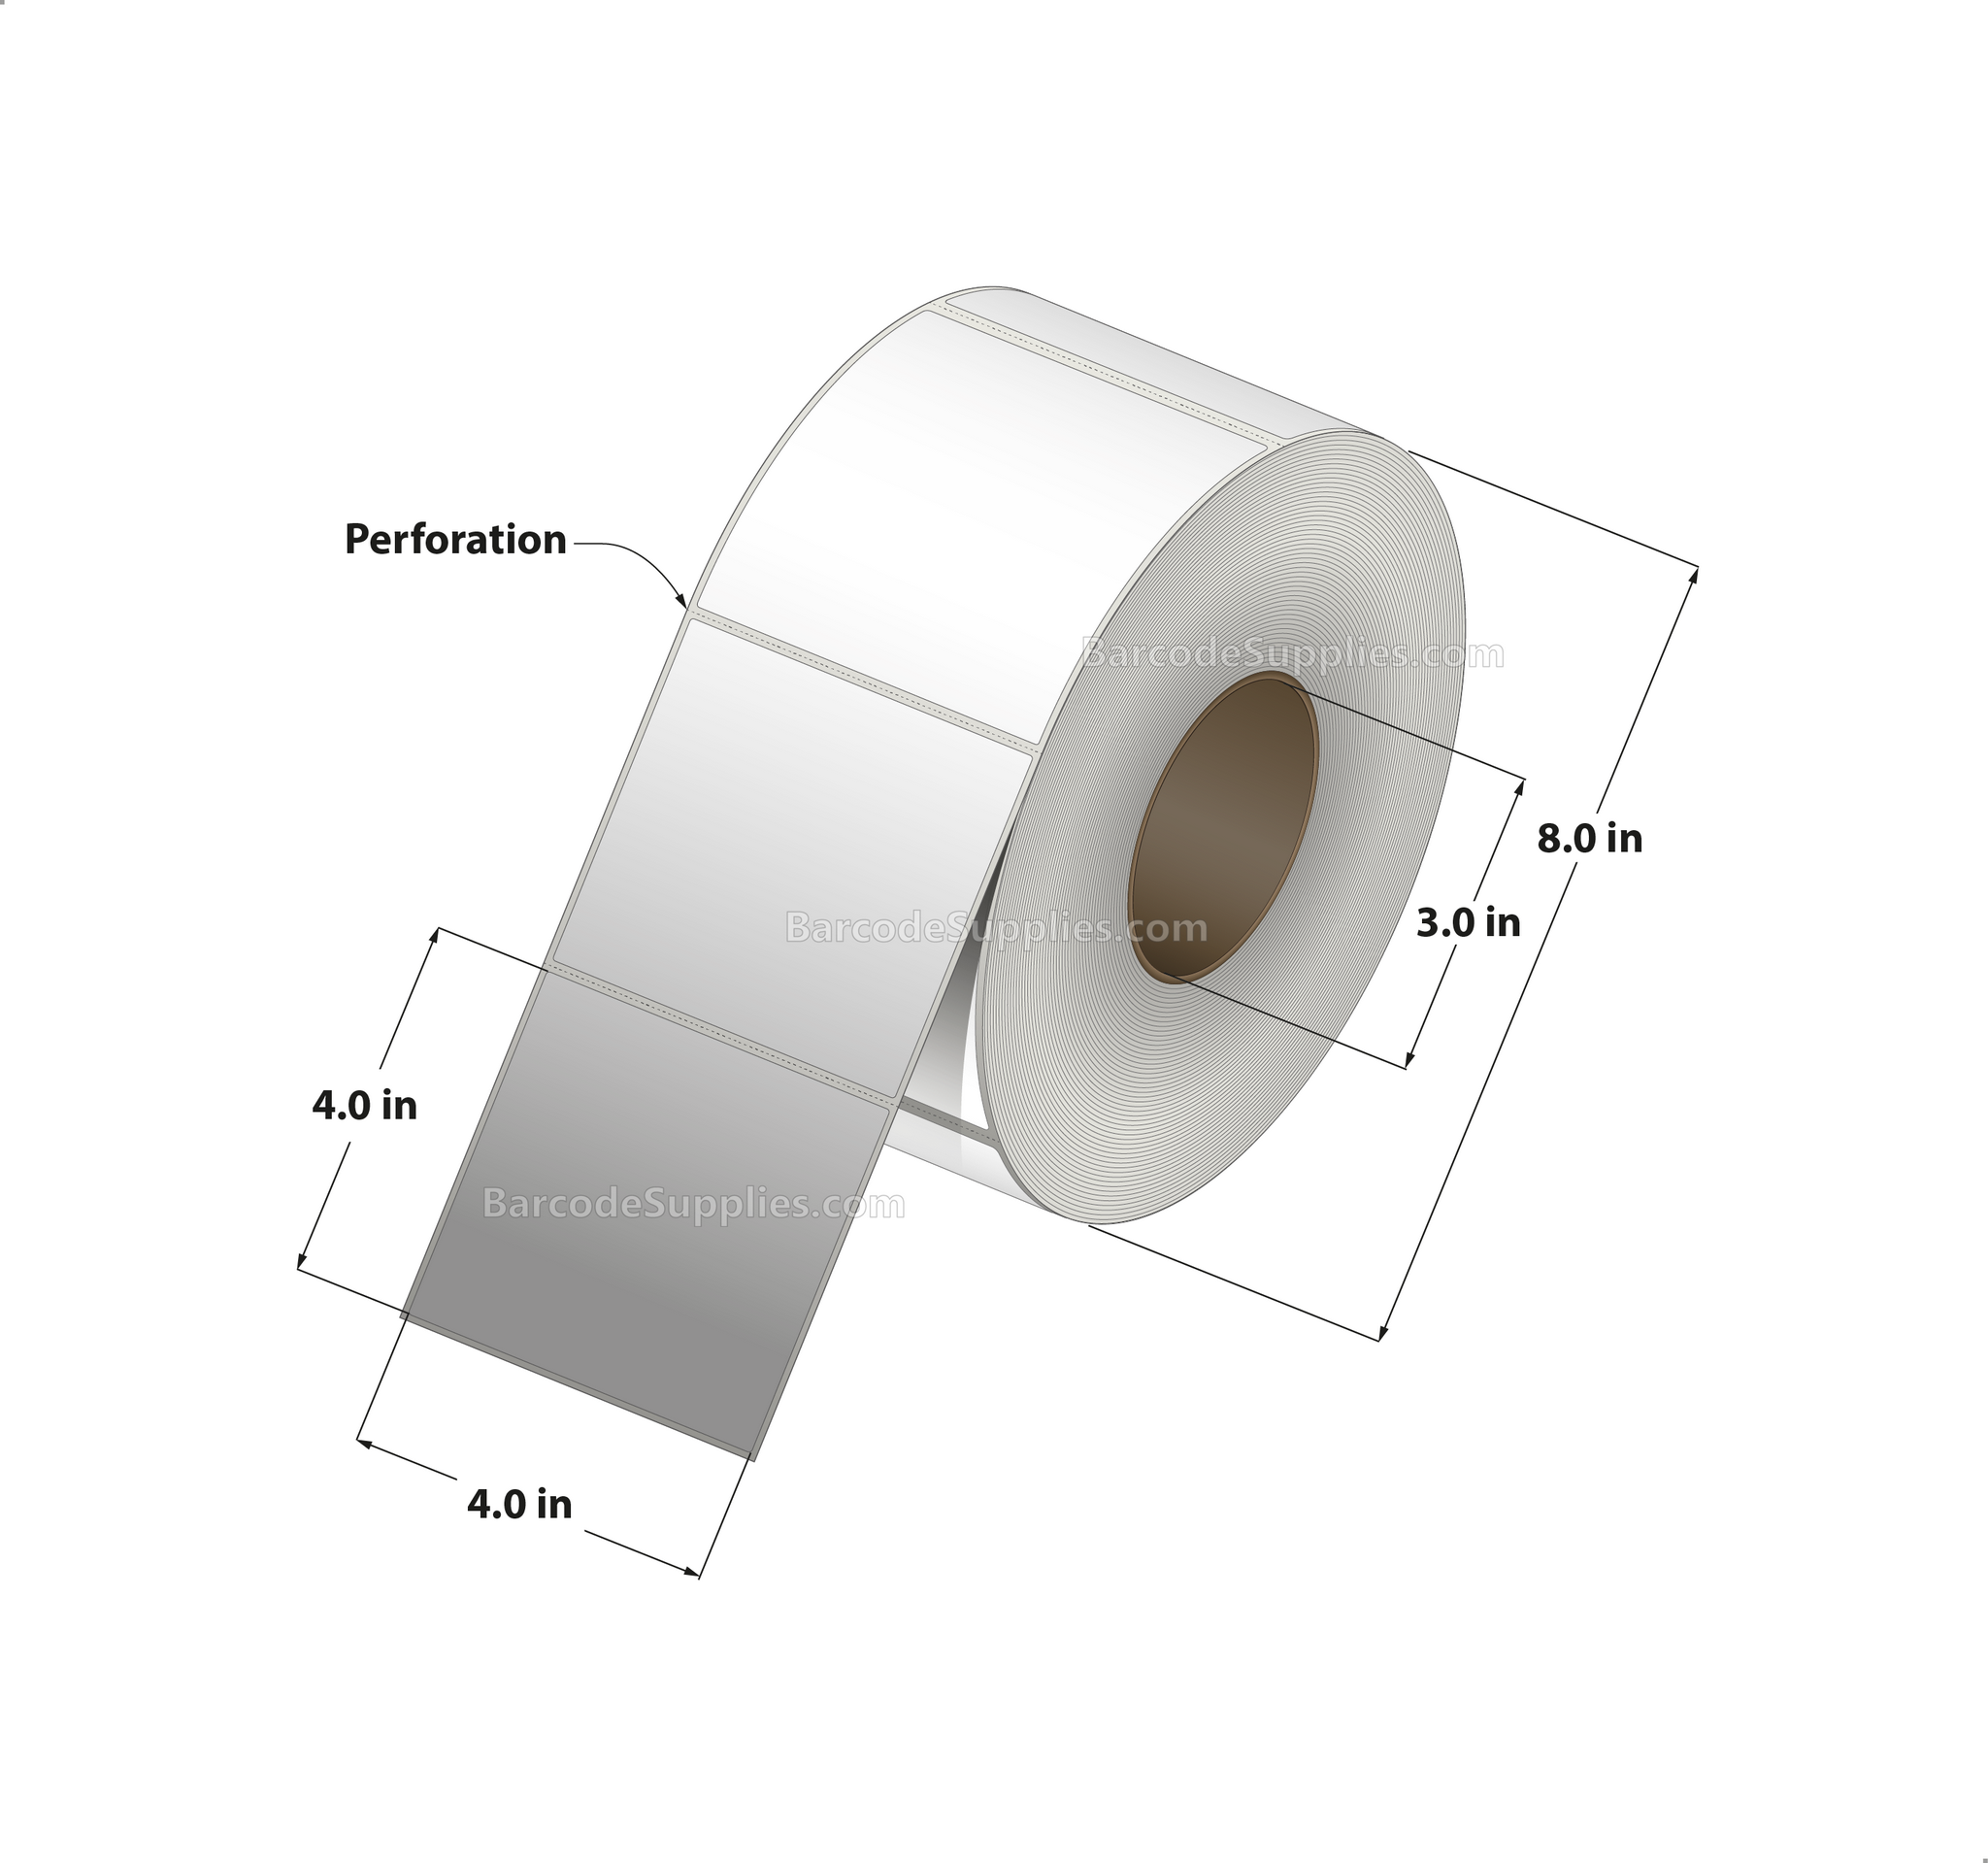 4 x 4 Thermal Transfer White Labels With Rubber Adhesive - Perforated - 1500 Labels Per Roll - Carton Of 4 Rolls - 6000 Labels Total - MPN: CTT400400-3P